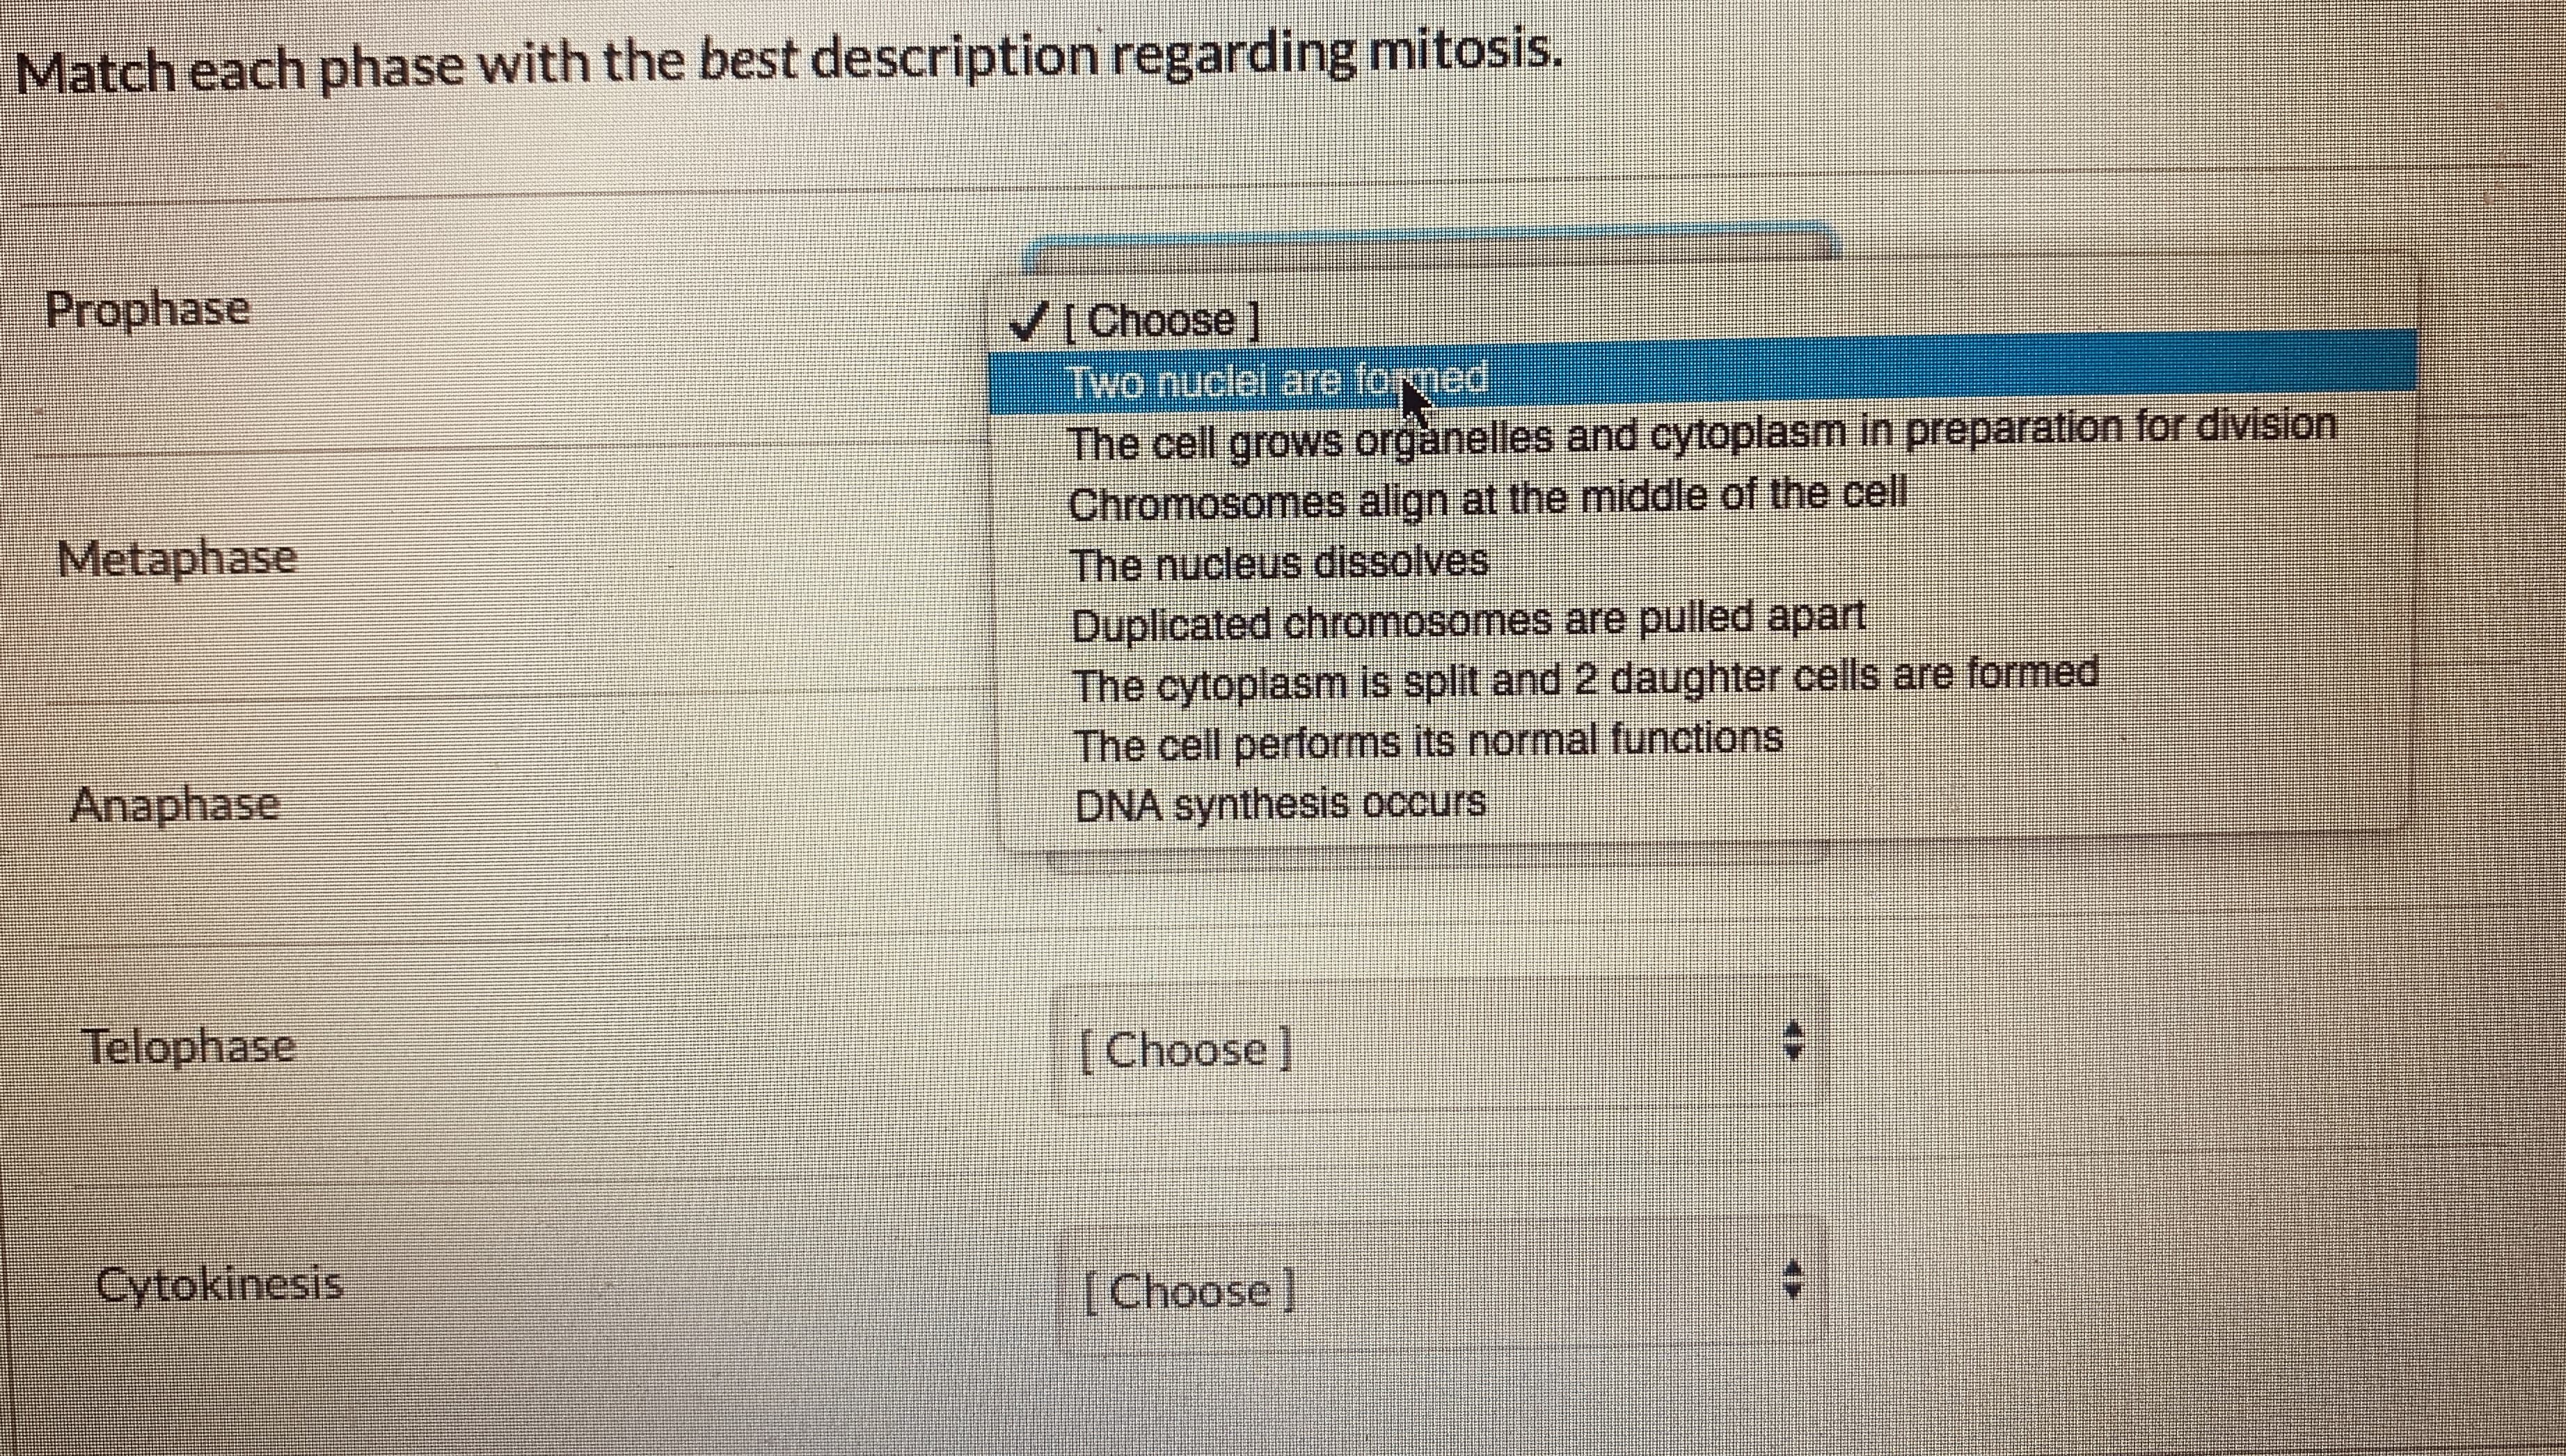 Match each phase with the best description regarding mitosis.
